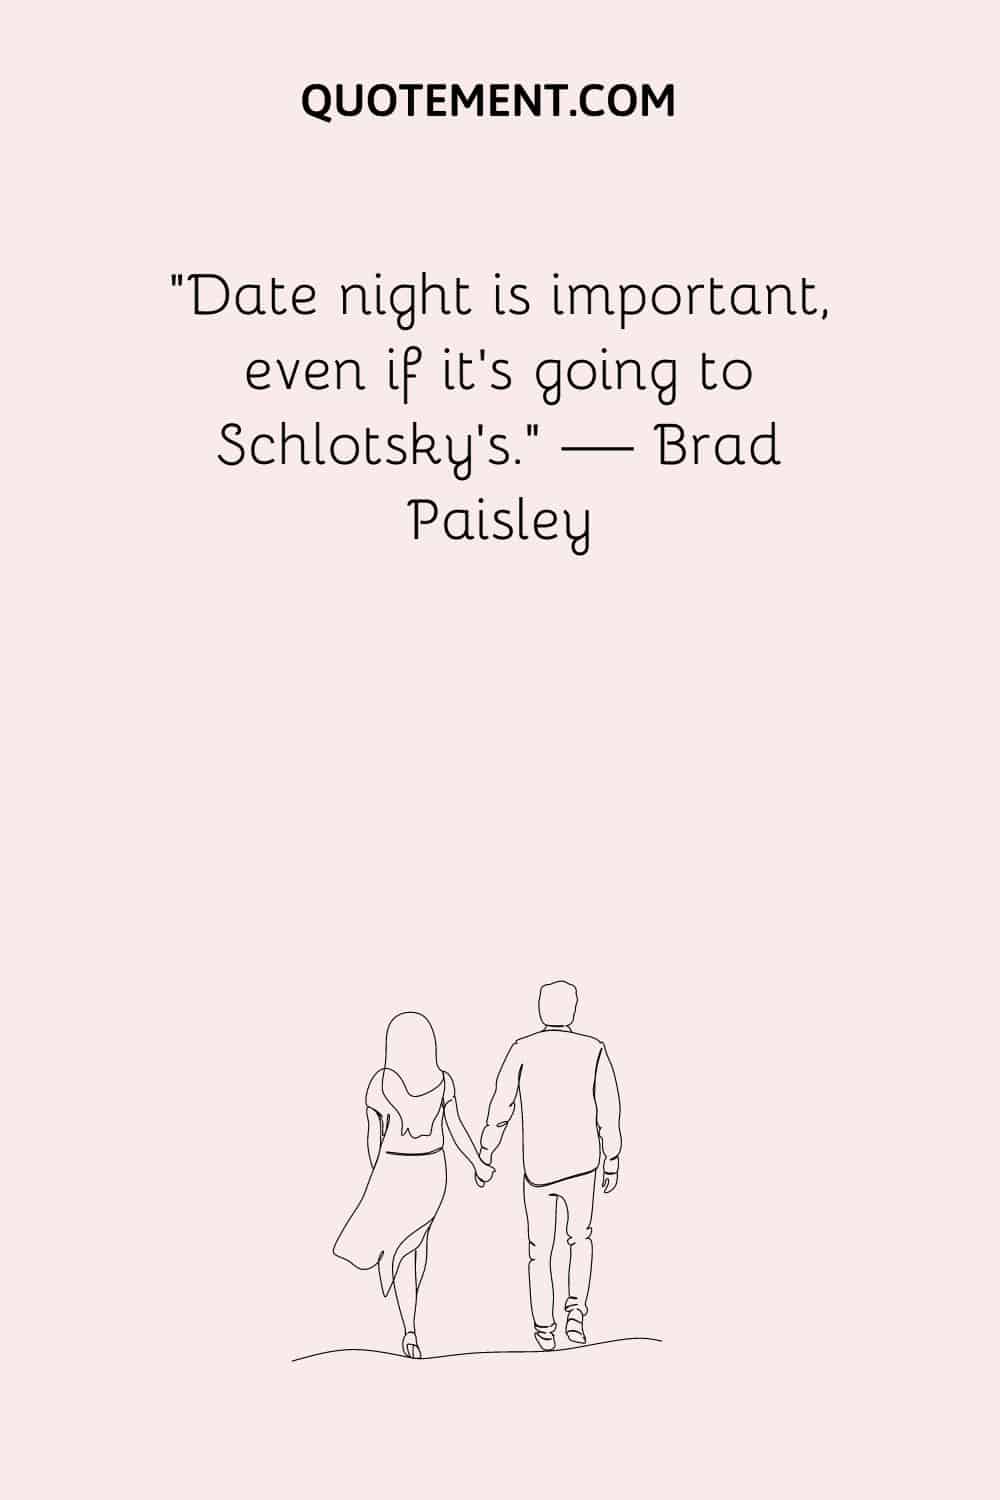 Date night is important, even if it’s going to Schlotsky’s